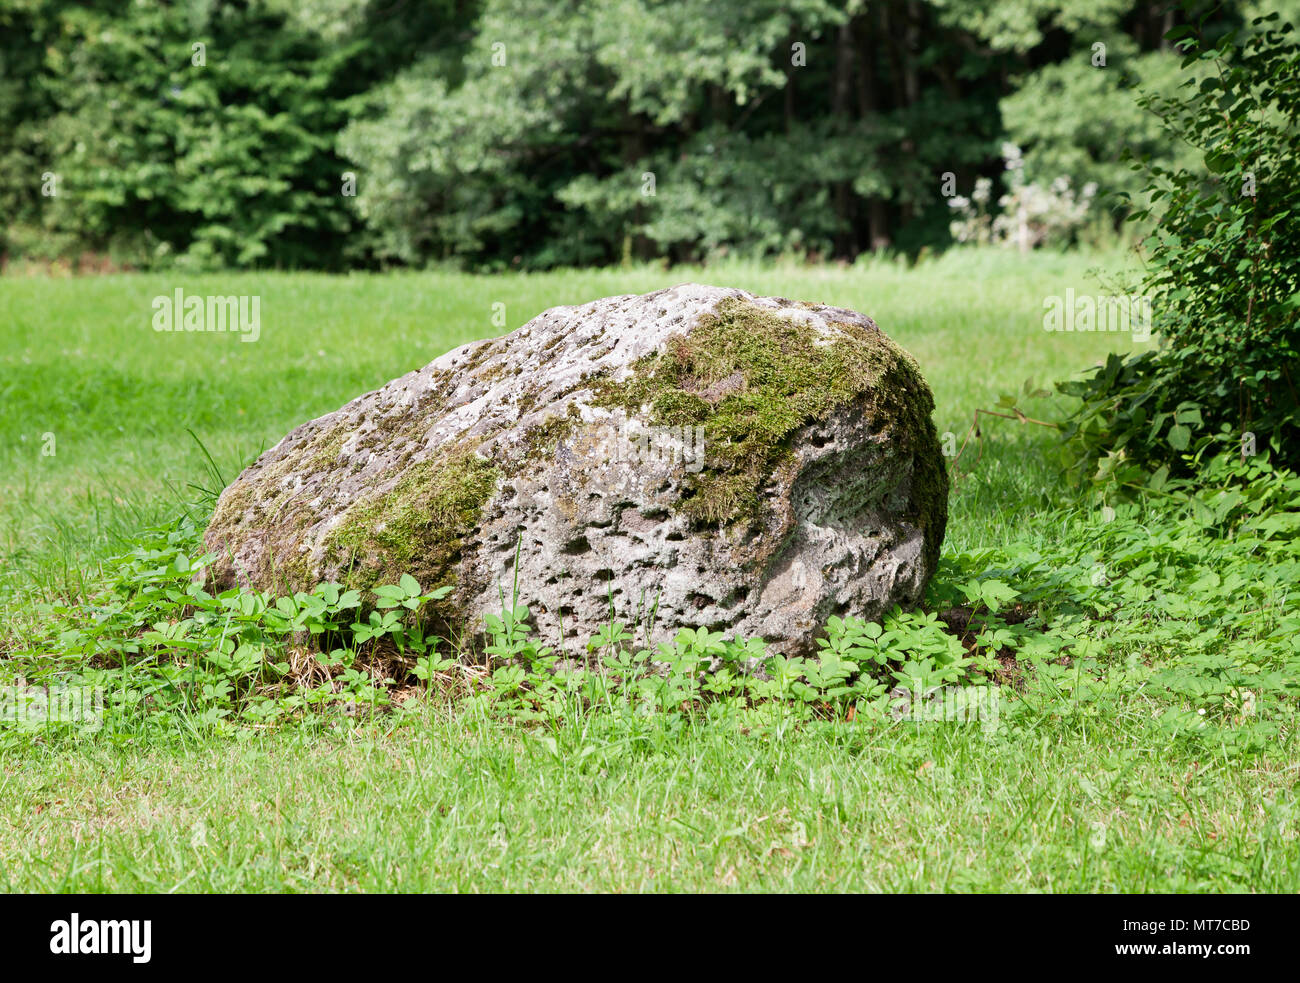 Mossy boulder laying in the grass on a sunny day Stock Photo